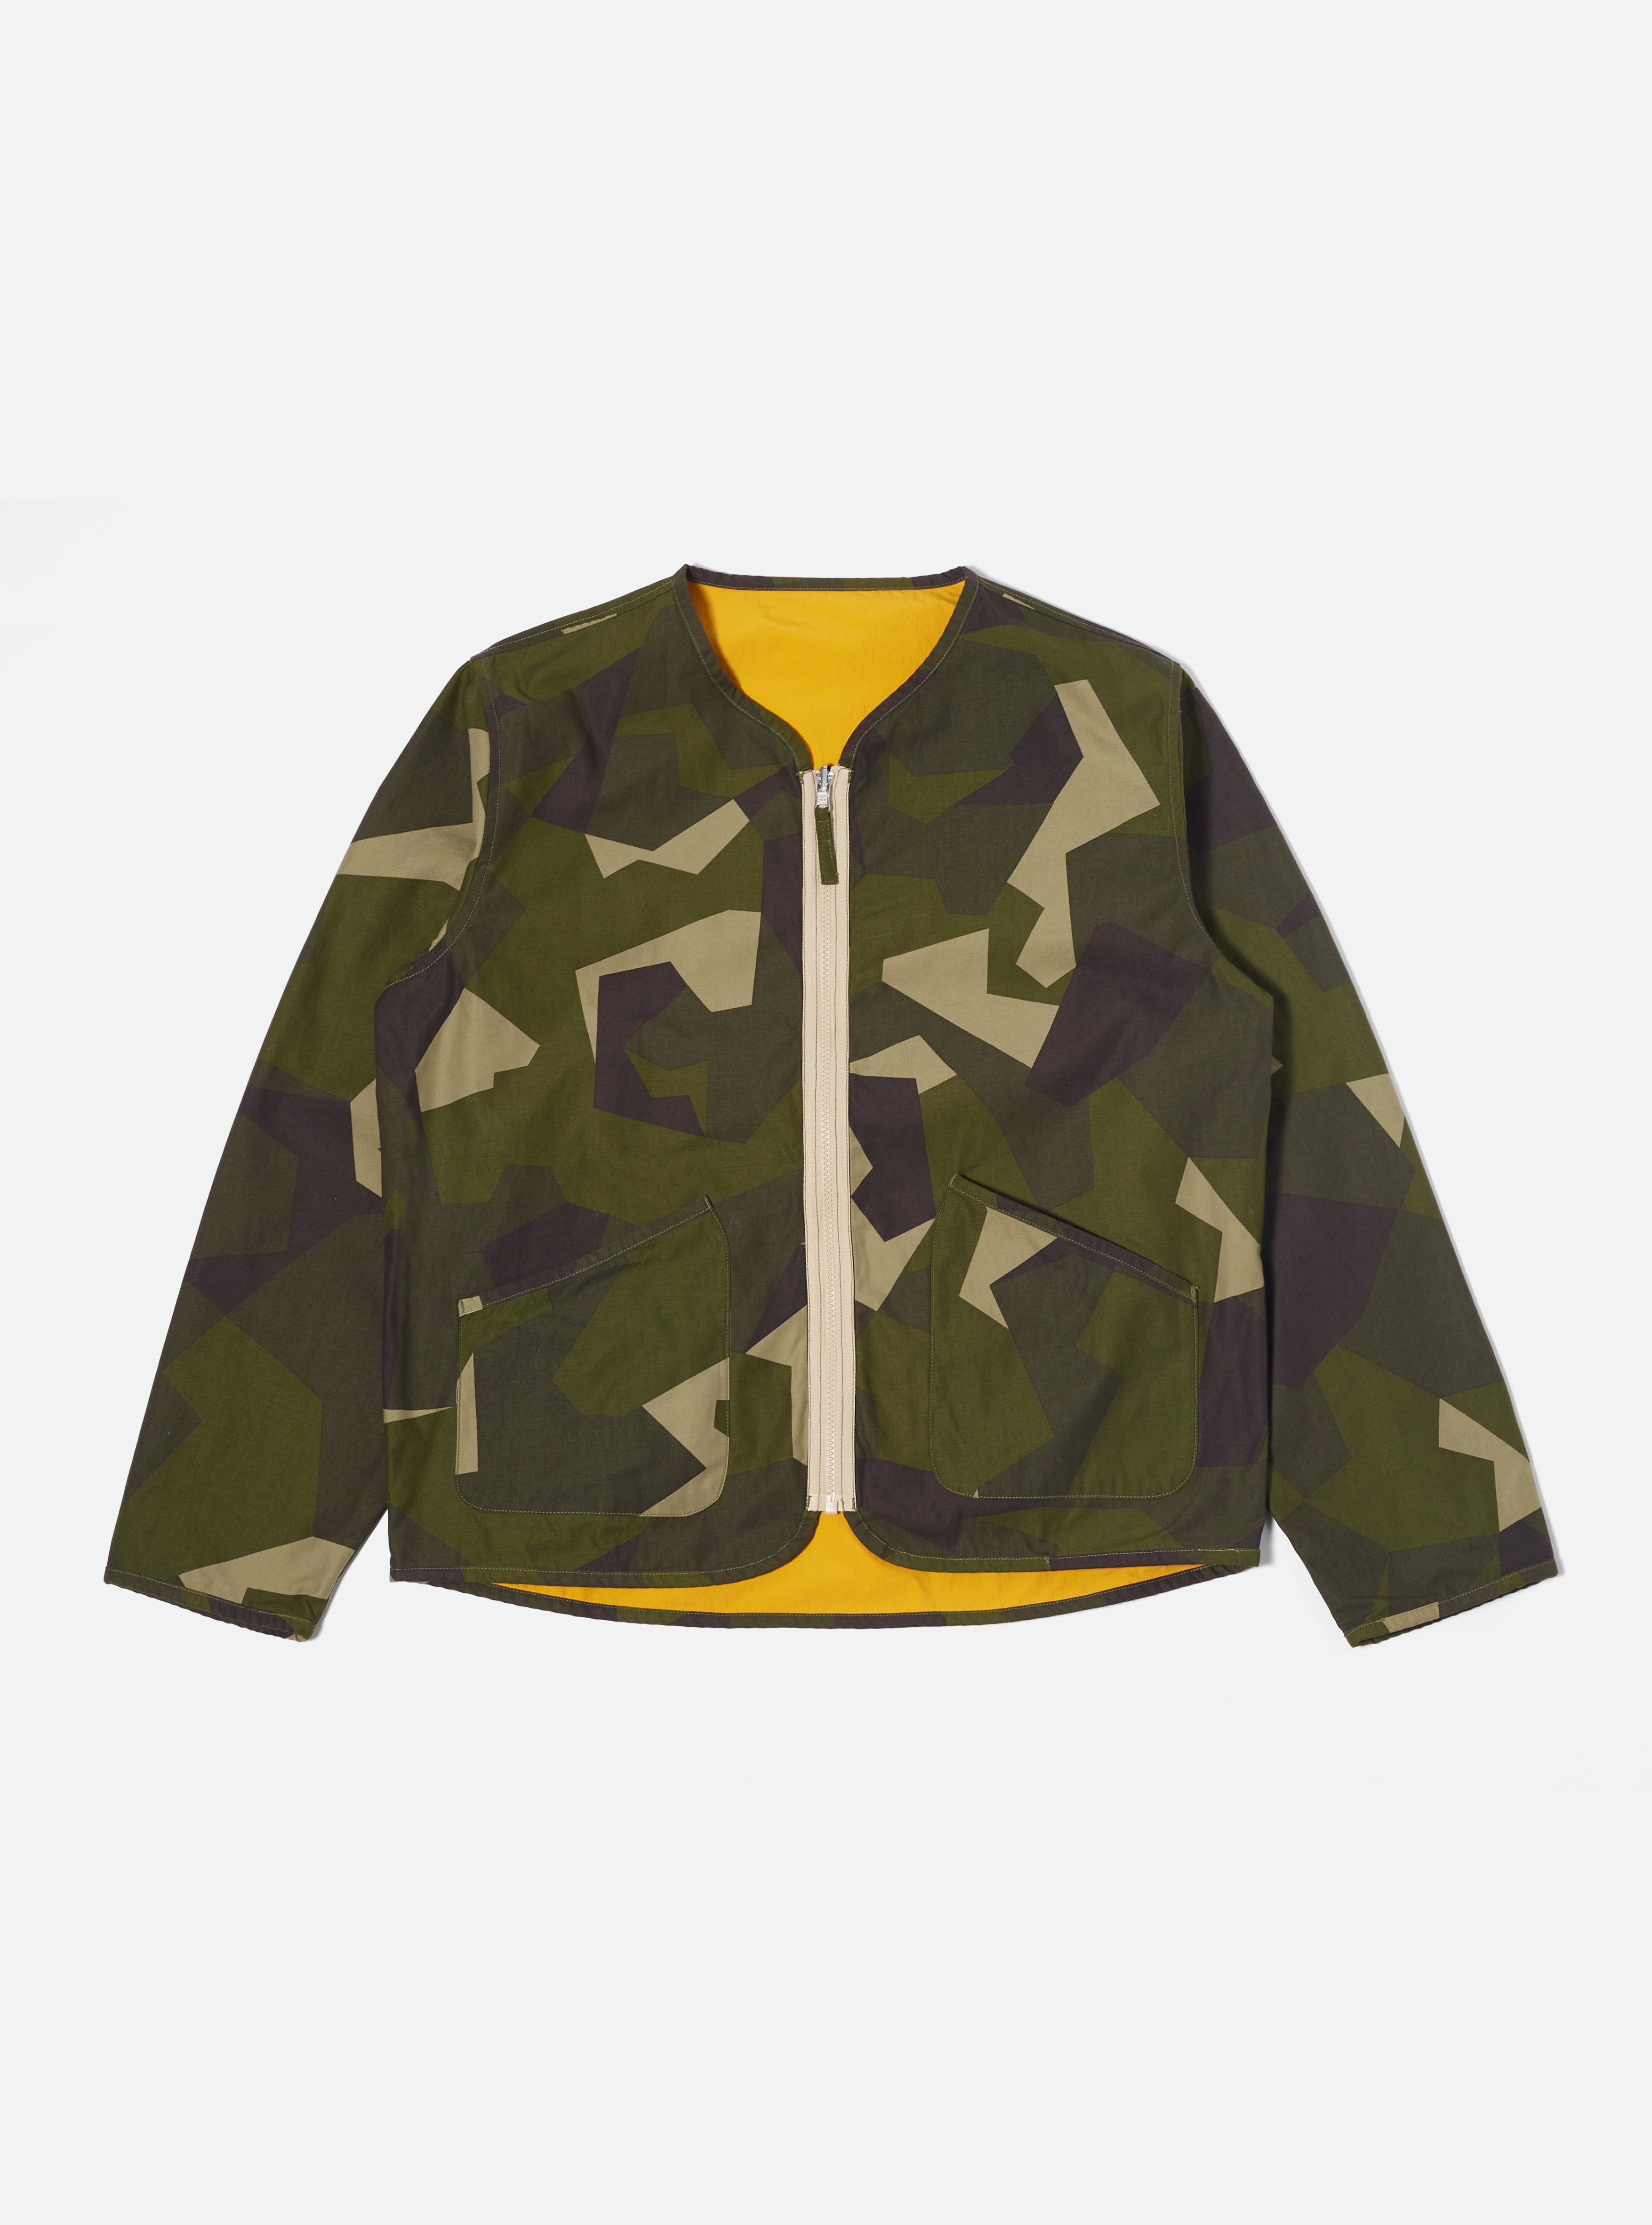 Based on a liner for a military jacket. Fully reversible, two jackets for the price of one! This is an ode to the fact that, rather than a facsimile of the OG Swedish Army Camo, our version is made by one of our favorite Japanese mills and pays homage to the original, making it more Shwed-ish than Swedish. 100% cotton with a mid-weight 250g plain weave finish, for a long-lasting durable cloth.